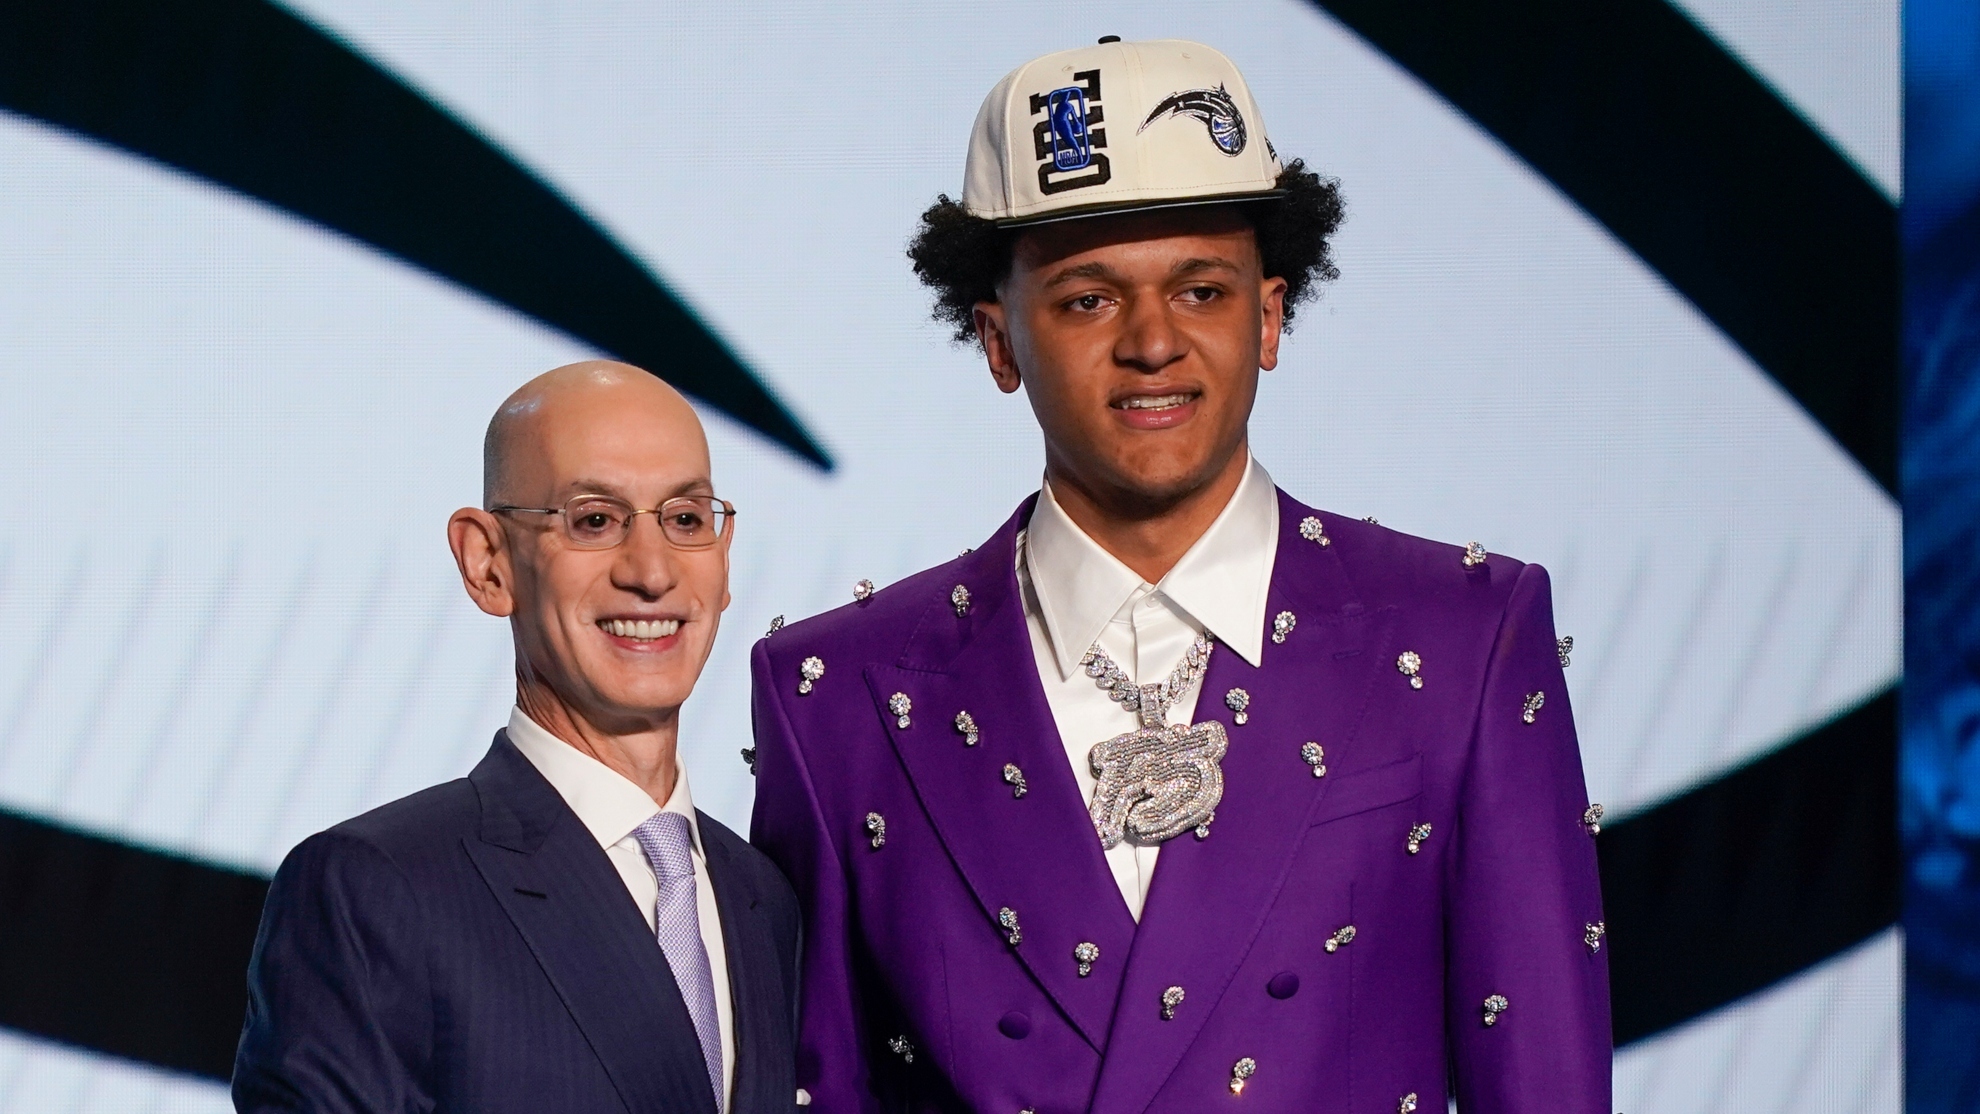 Paolo Banchero, right, poses for a photo with NBA Commissioner Adam Silver after being selected as the number one pick overall by the Orlando Magic in the NBA basketball draft